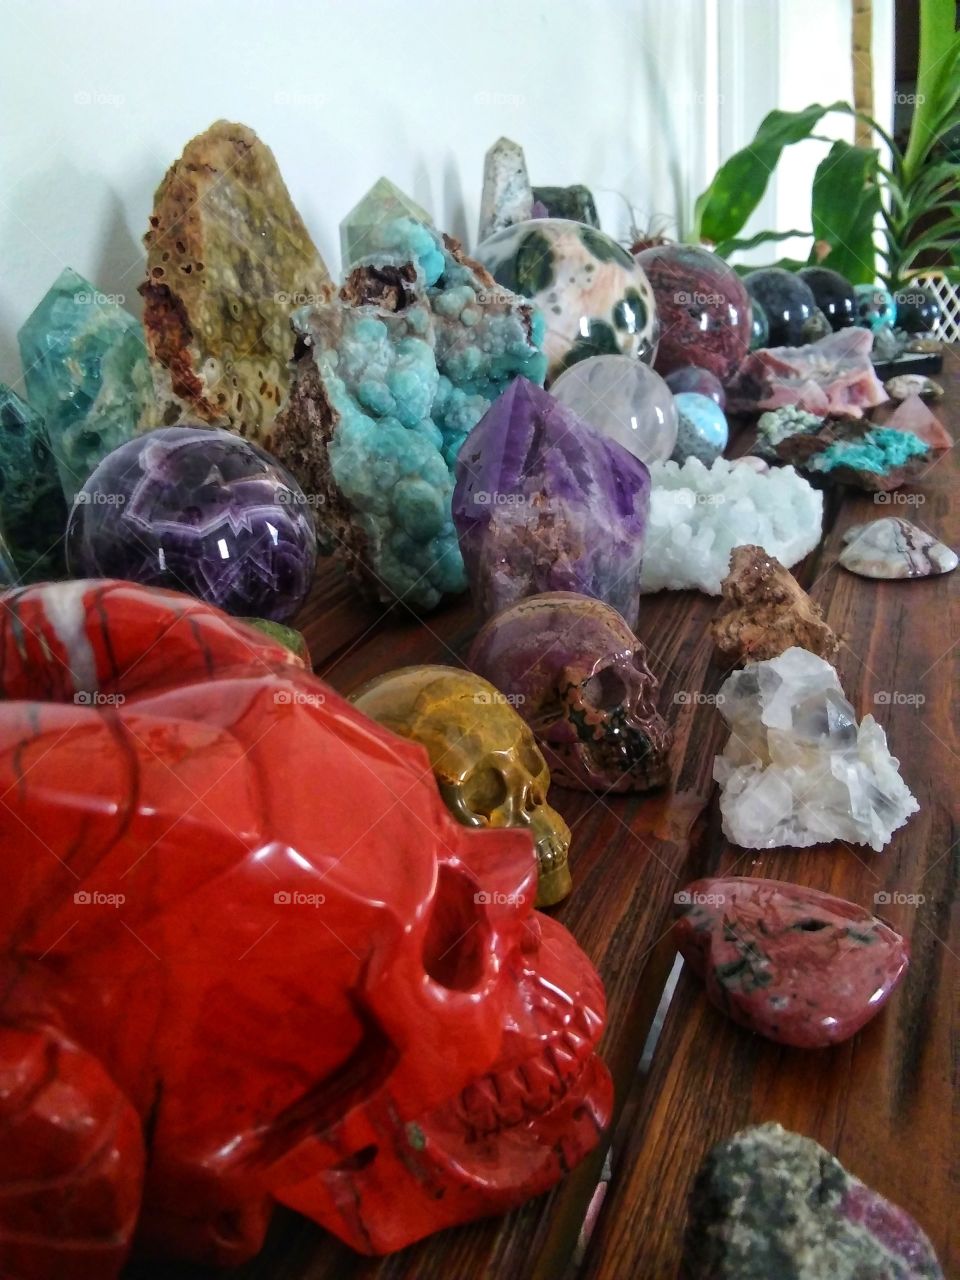 So many gorgeous crystals! Hard to believe that the earth creates so many gorgeous stones for us to enjoy!